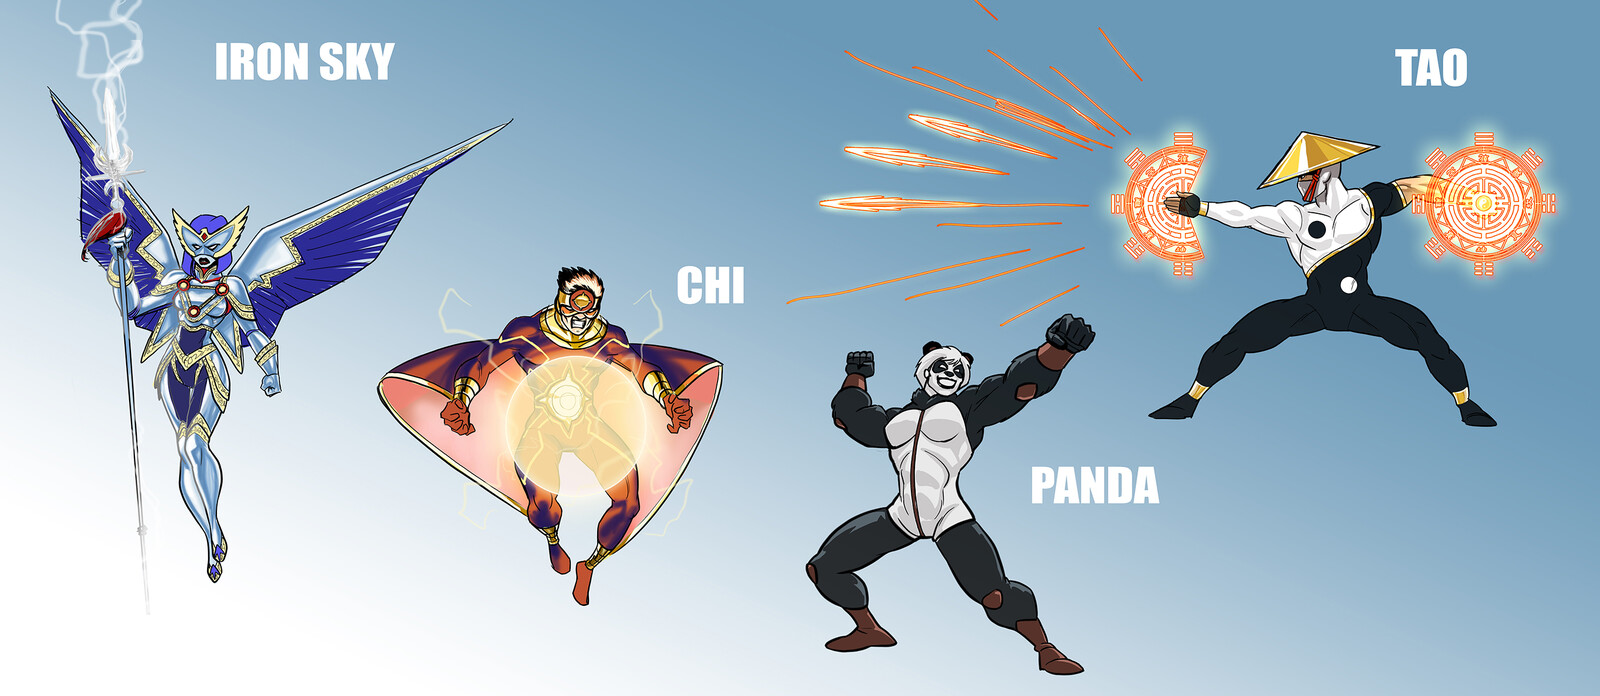 More chinese super-heroes